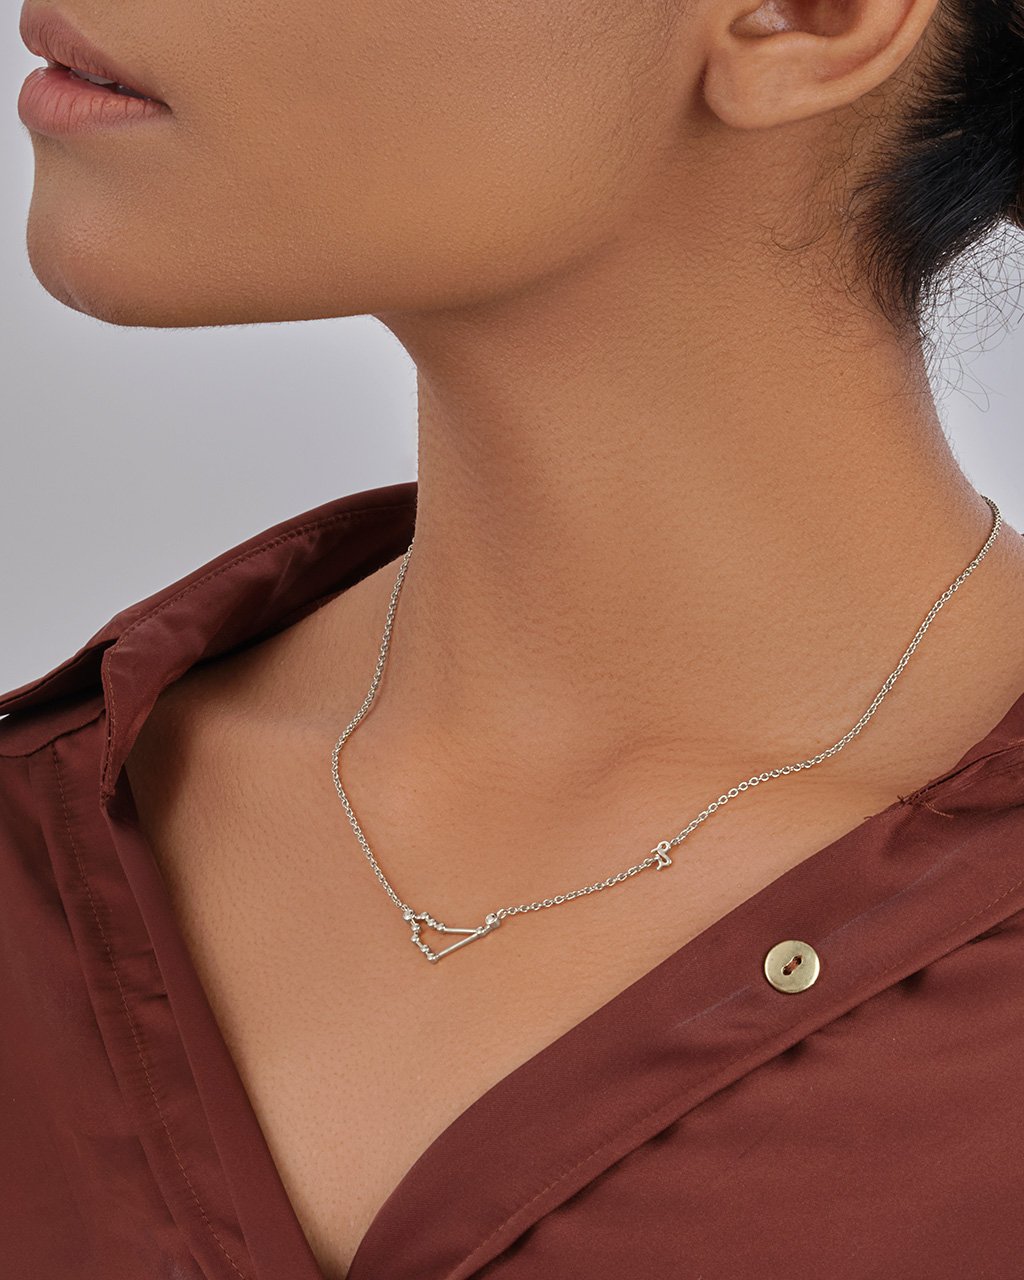 Station Constellation Pendant Necklace Necklace Sterling Forever 